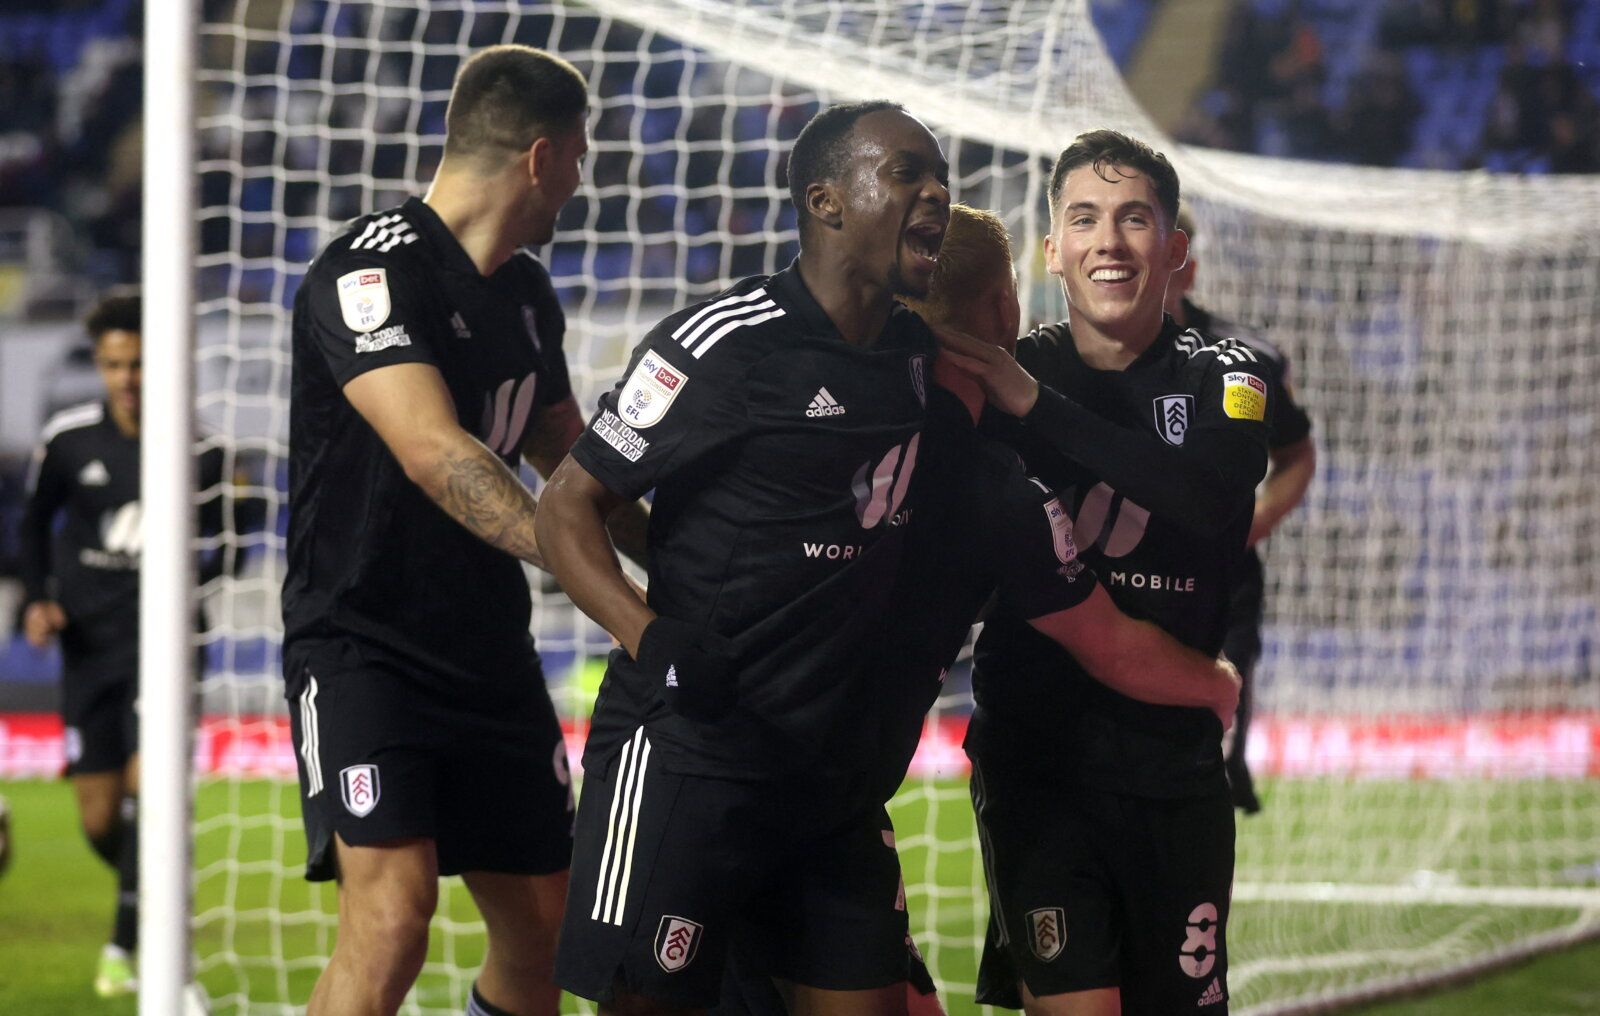 Soccer Football - Championship - Reading v Fulham - Madejski Stadium, Reading, Britain - January 11, 2022 Fulham's Neeskens Kebano celebrates scoring their fifth goal with teammates   Action Images/Matthew Childs  EDITORIAL USE ONLY. No use with unauthorized audio, video, data, fixture lists, club/league logos or 